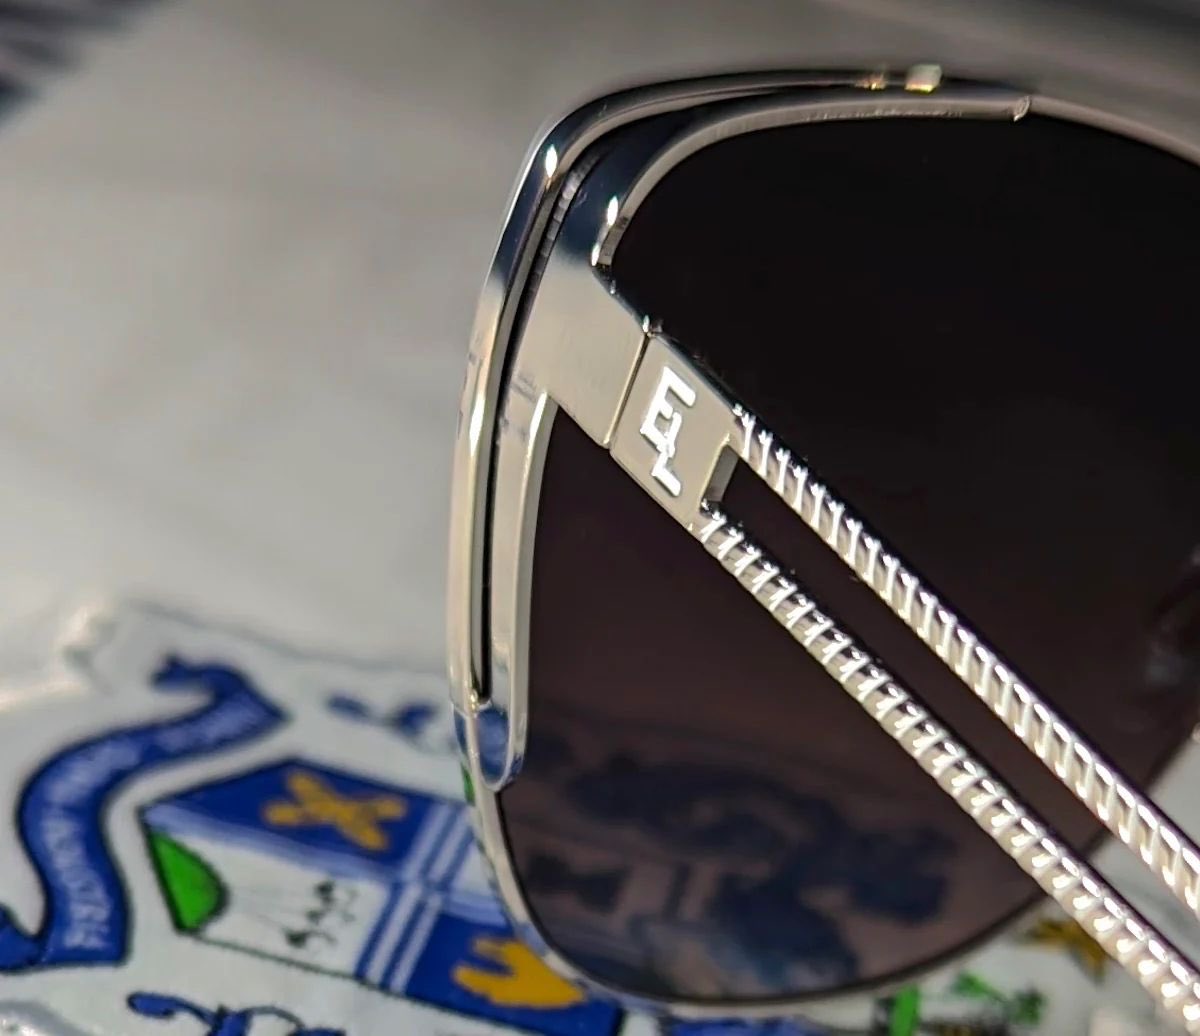 ⚪️🔵 Exciting news for all Bury FC fans! Our main shirt sponsor, EyeLevel, is offering an exclusive 10% discount on all orders! 😎 Get stylish sunglasses or reading glasses and you'll also receive a free EyeLevel R9 retainer with your order! Shop now and use code